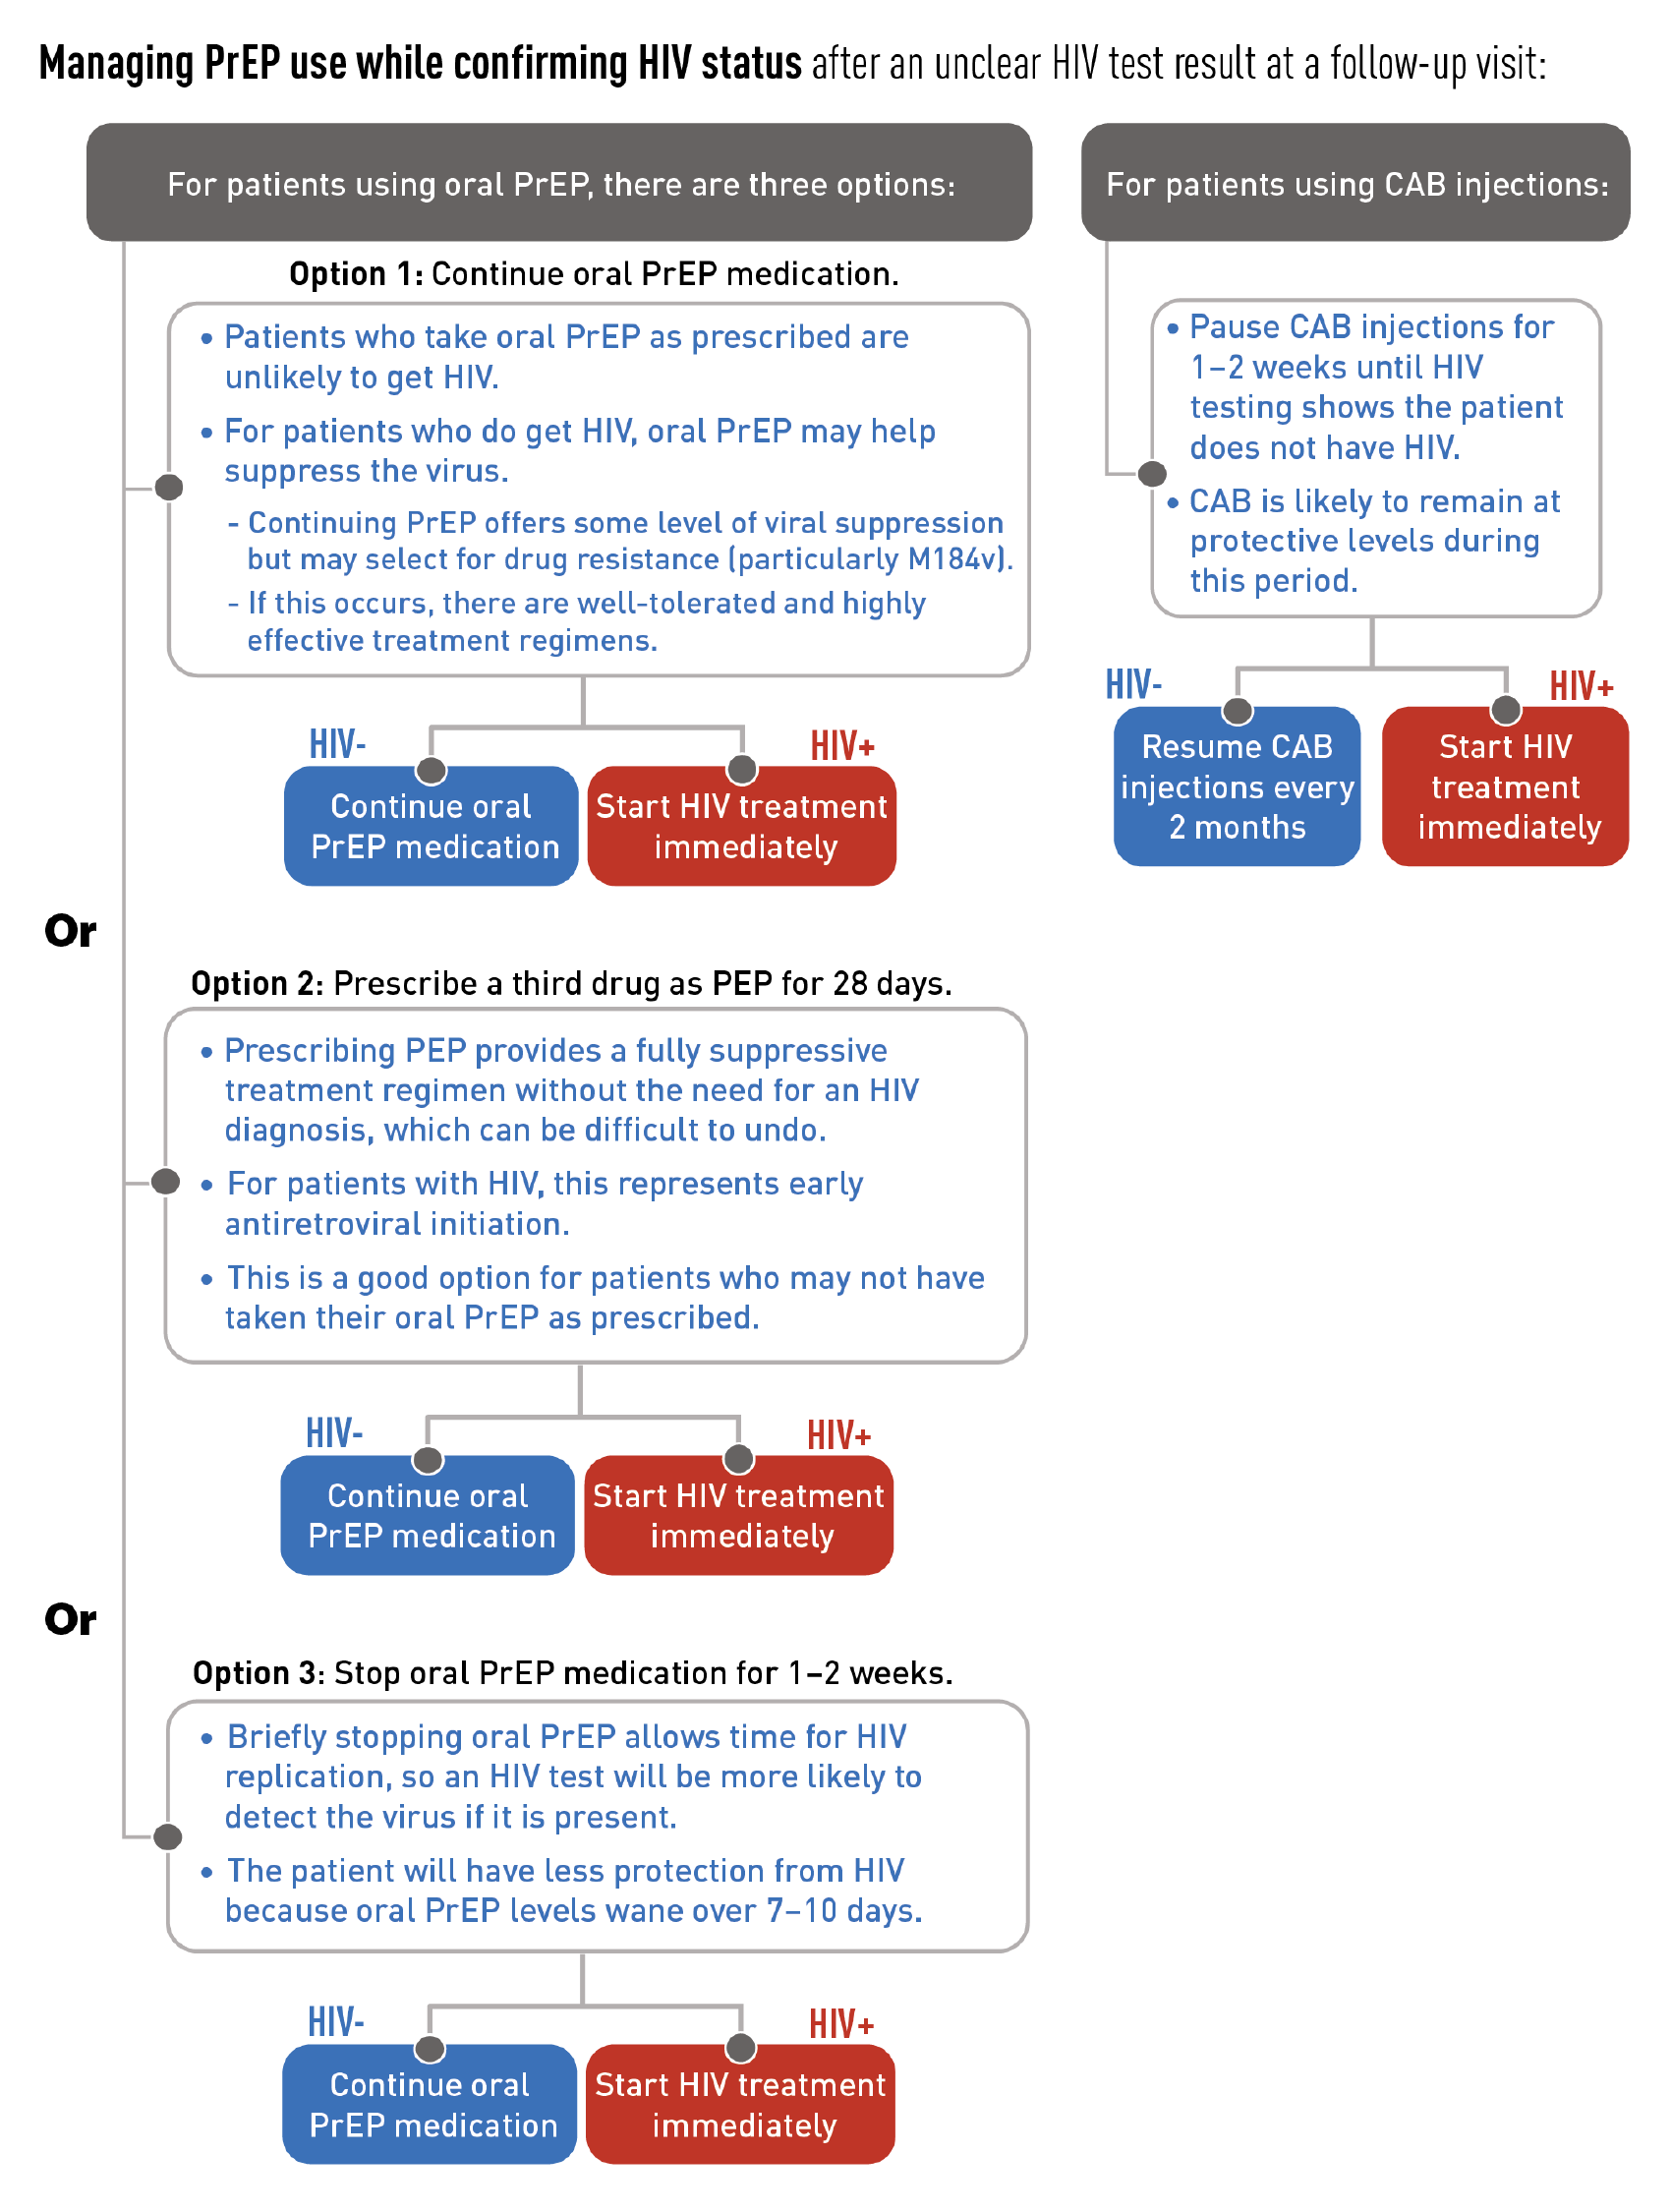 Managing PrEP use while confirming HIV status after an ambiguous HIV test result (Flowchart)